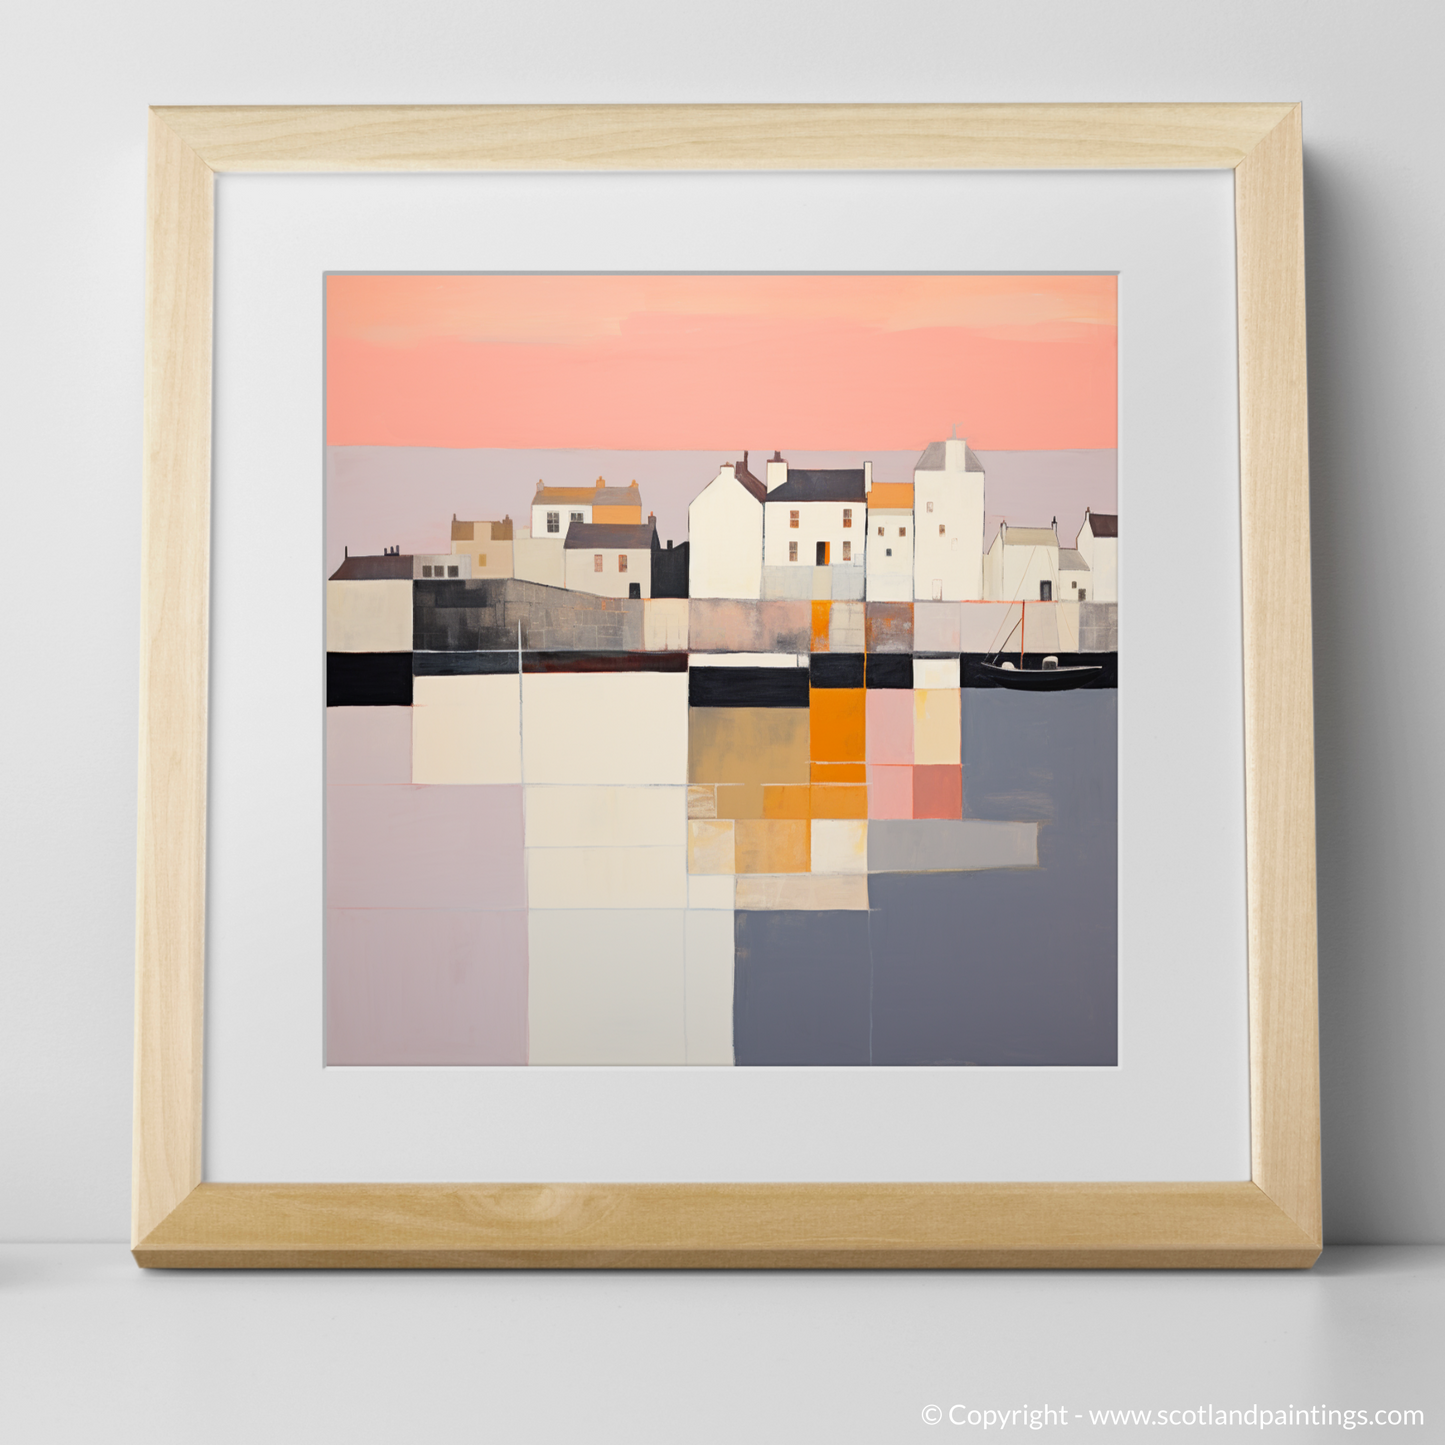 Pittenweem Harbour at Sunset: An Abstract Ode to Serenity